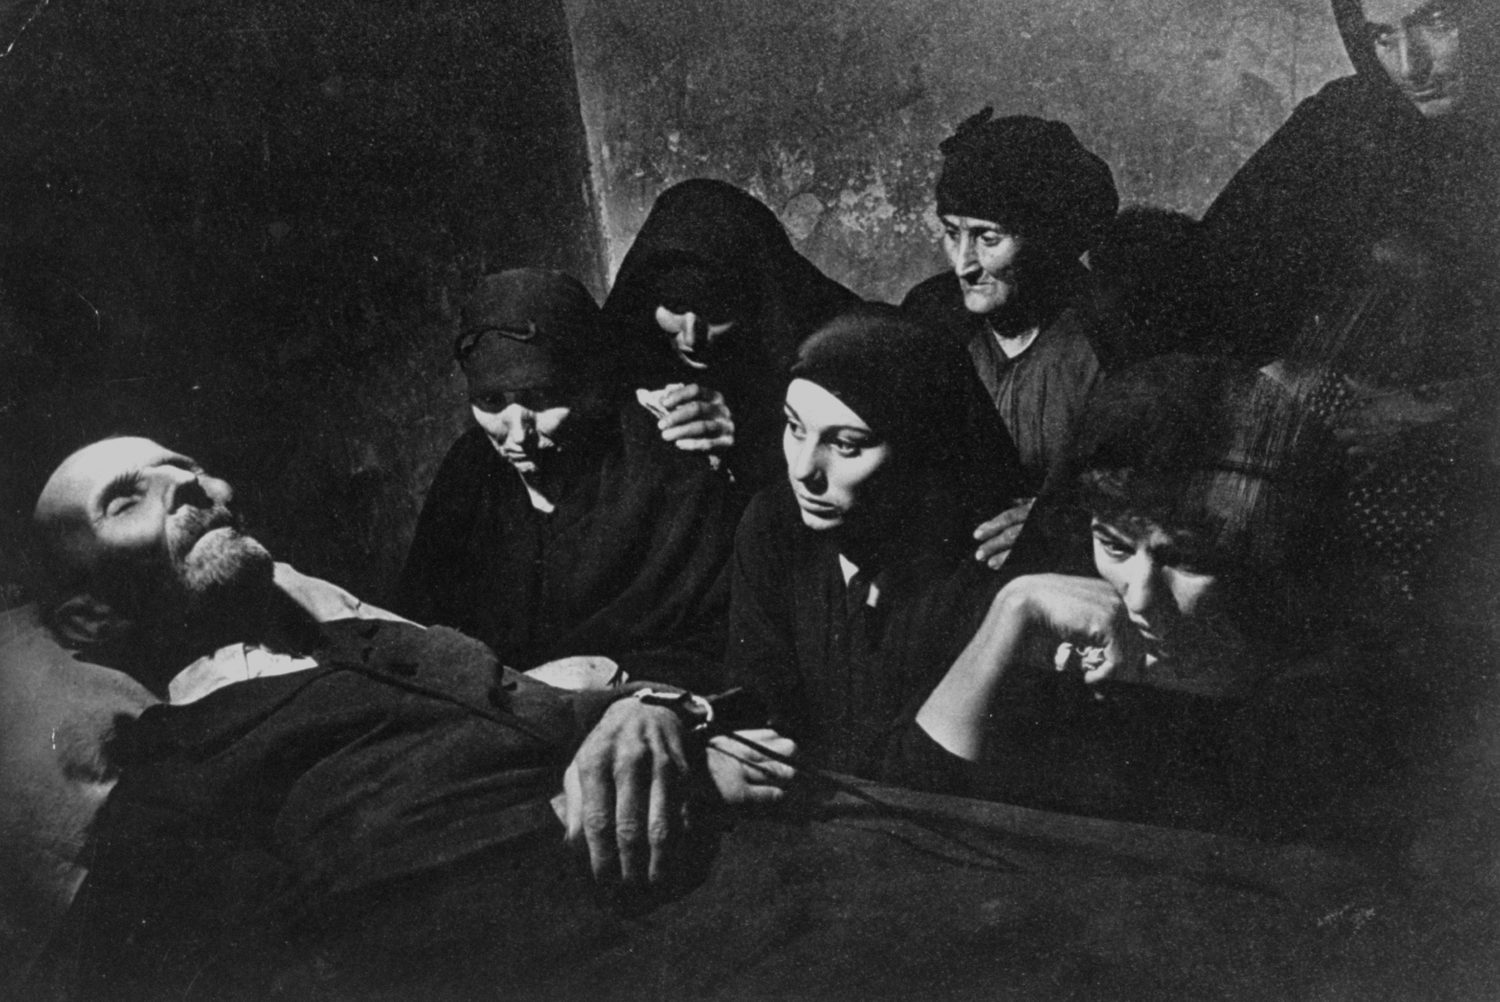 Women mourn the body of villager Juan Larra in a 1951 photograph from W. Eugene Smith’s photo essay “Visit to a Spanish Village”